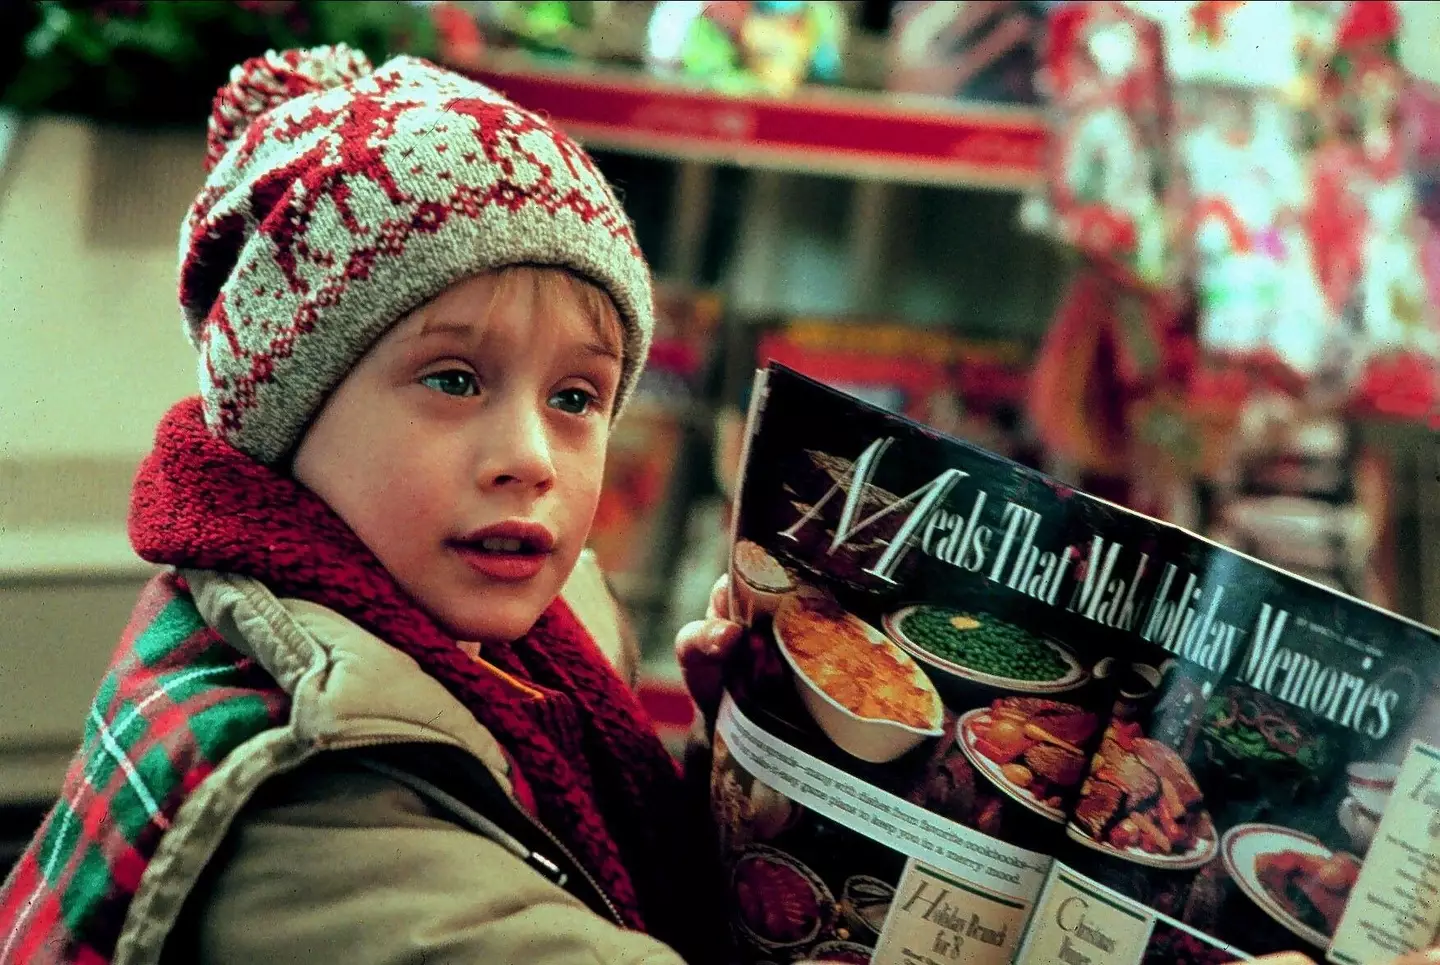 Home Alone went on to break box office records.